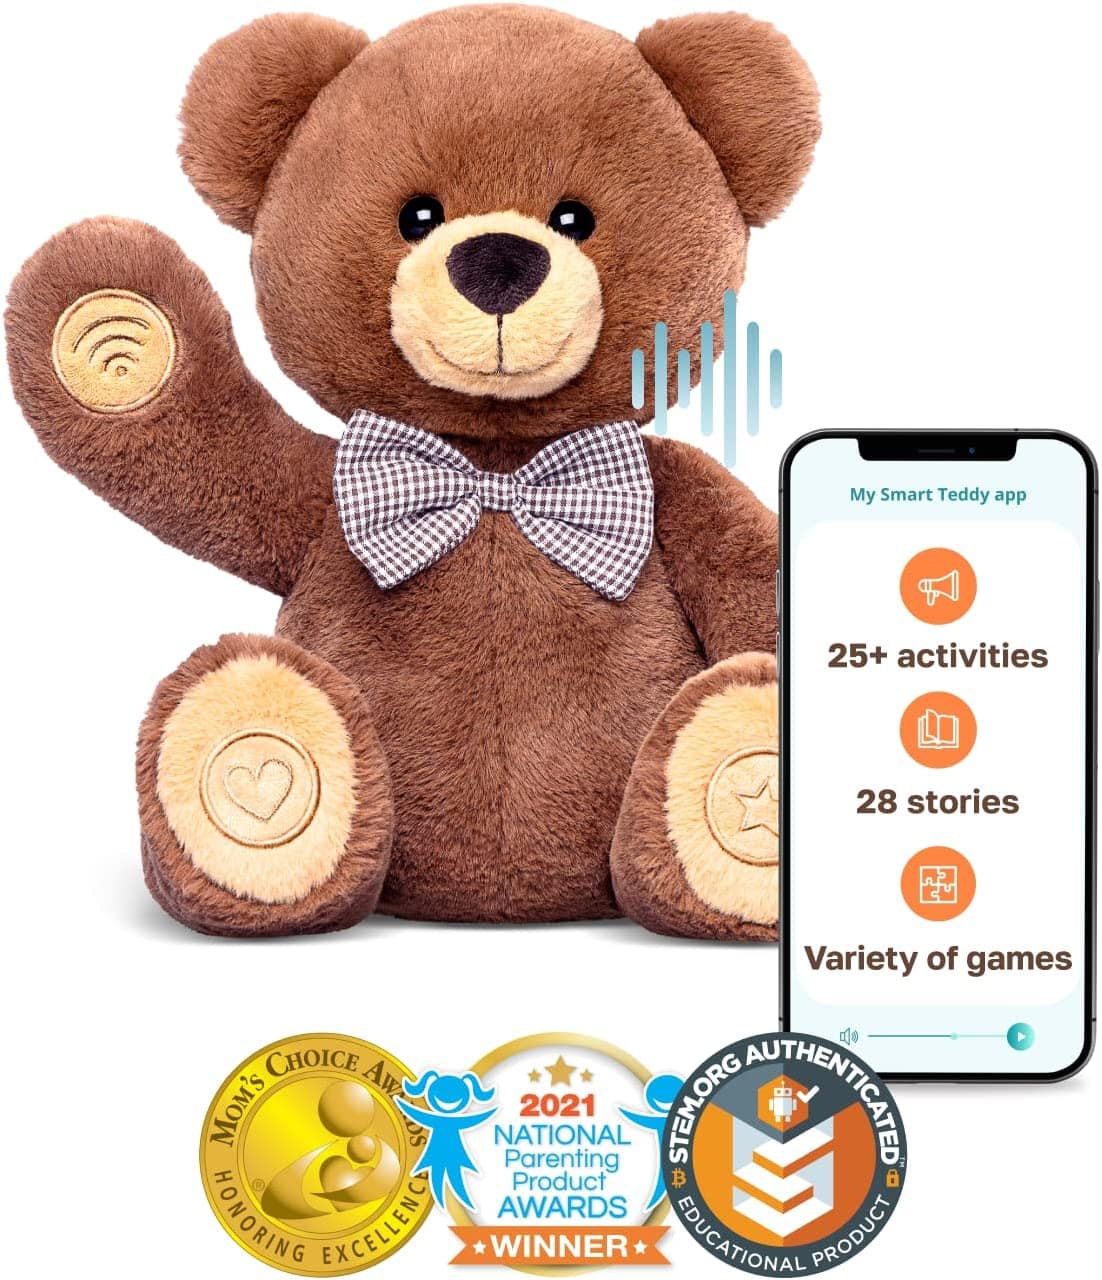 Brown teddy bear waving with phone showing the bear's features